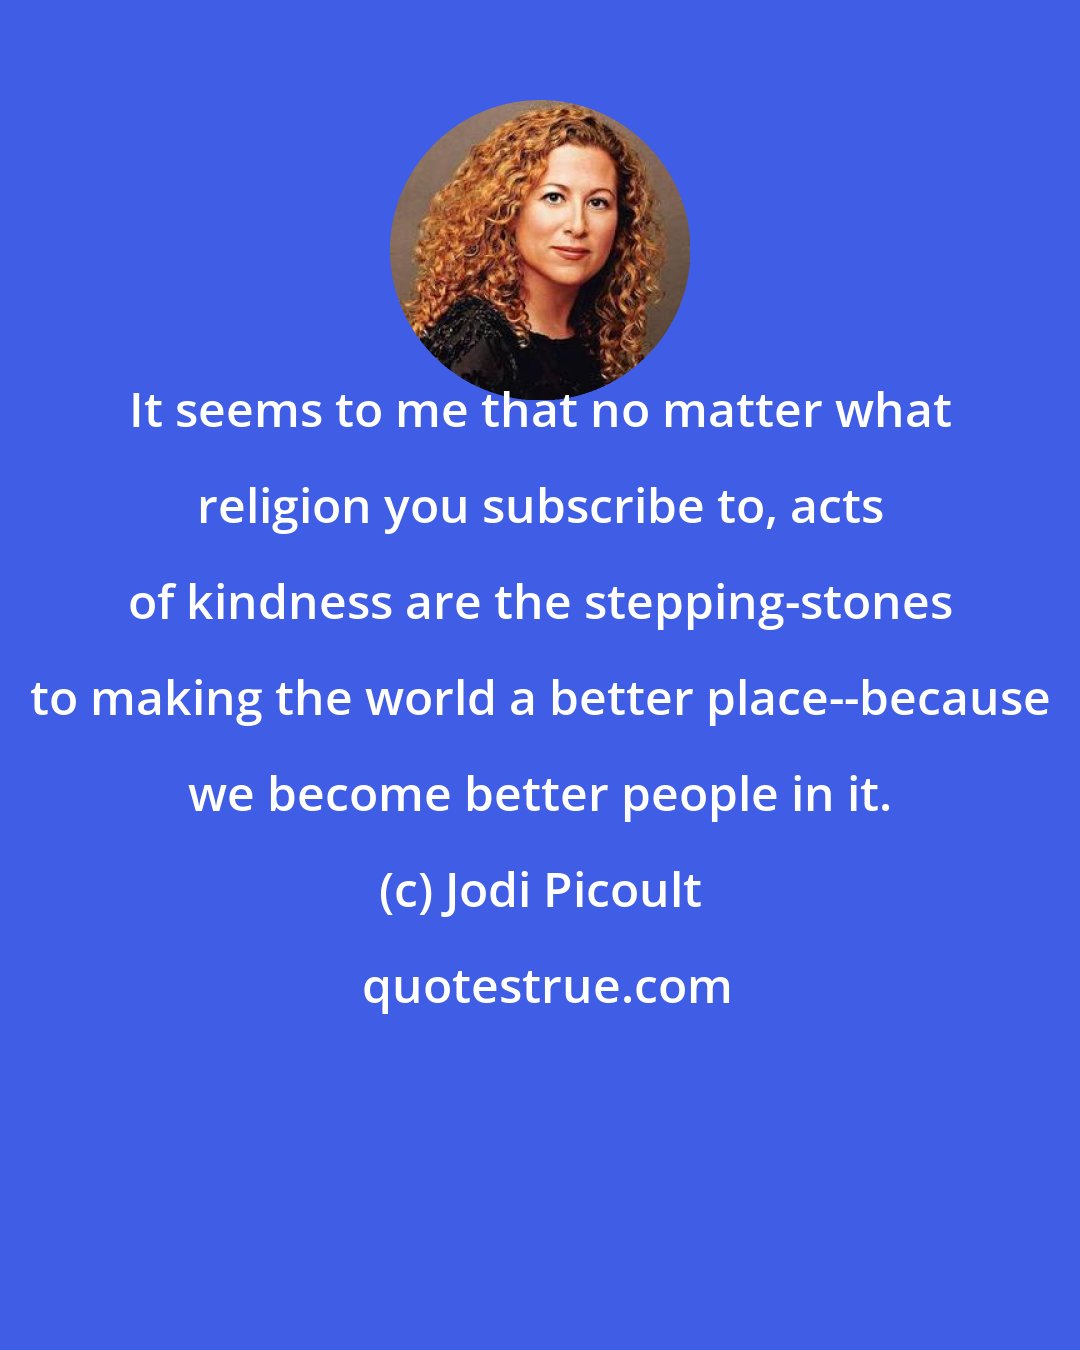 Jodi Picoult: It seems to me that no matter what religion you subscribe to, acts of kindness are the stepping-stones to making the world a better place--because we become better people in it.